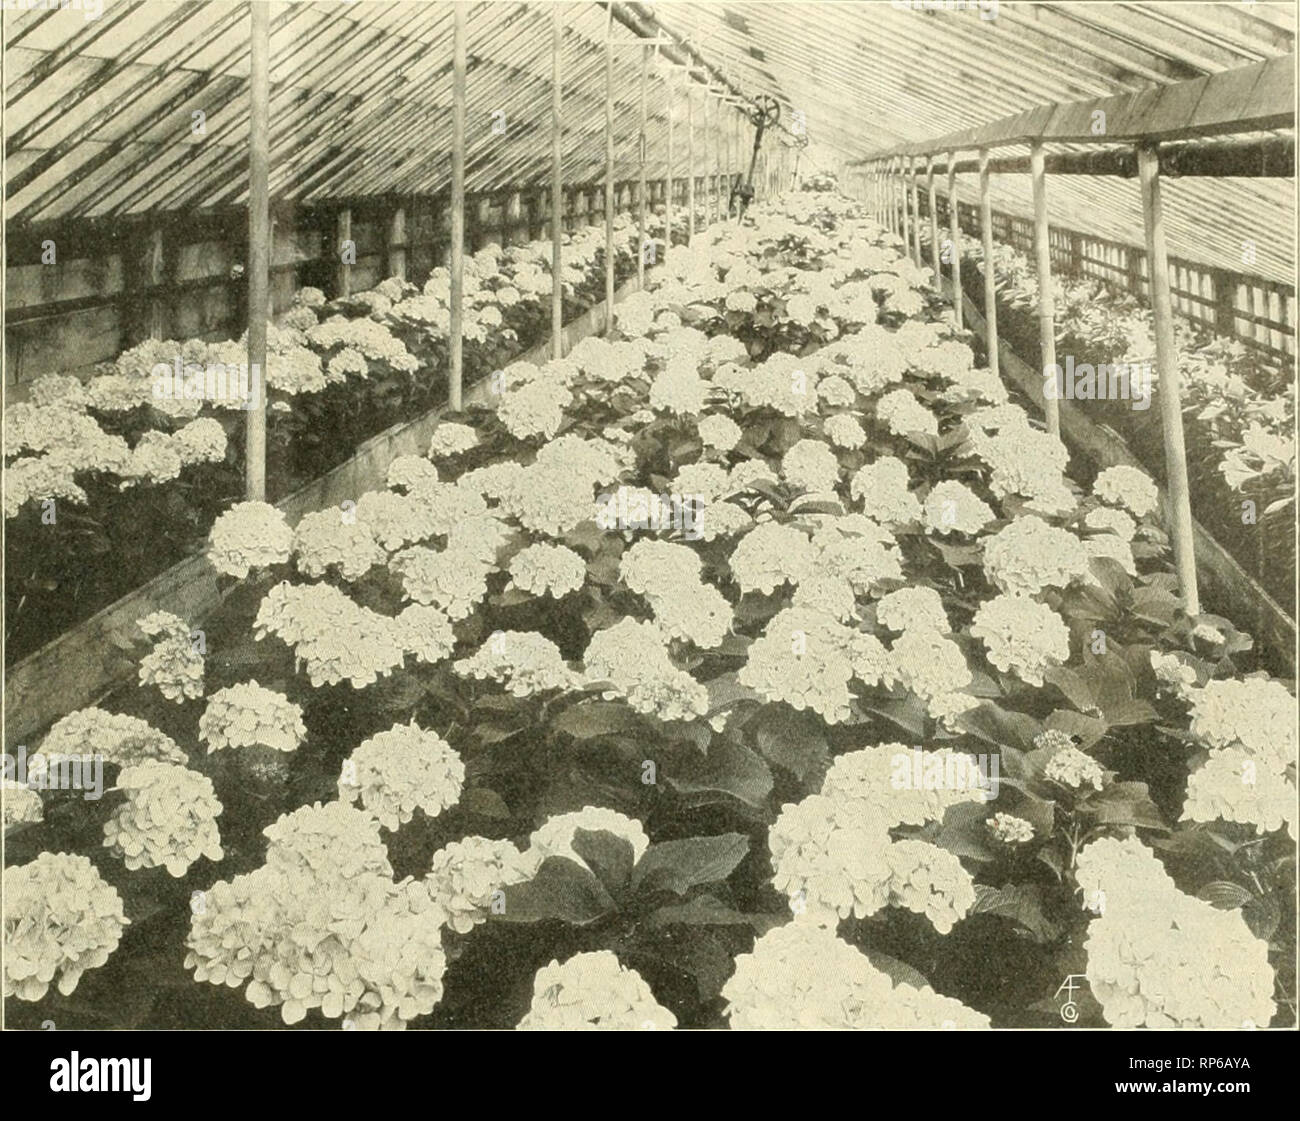 . The American florist : a weekly journal for the trade. Floriculture; Florists. igri. The American Florist.. HYDRANGEAS AT THE DONALDSON GREENHOUSES, MINNEAPOLIS, MINN. money-making. Well, sir,&quot; concluded the would-be florist, &quot;if you know of anybody looking for greenhouses, please send him around. I'll sell out cheap.&quot; Now here is a case of a man who, because the florists' business looked good to him, did not at all hes- itate to dispose of his coal business, and to embark in something he did not know anything about. Can we imagine a carpet-weaver or a doctor undertaking their Stock Photo